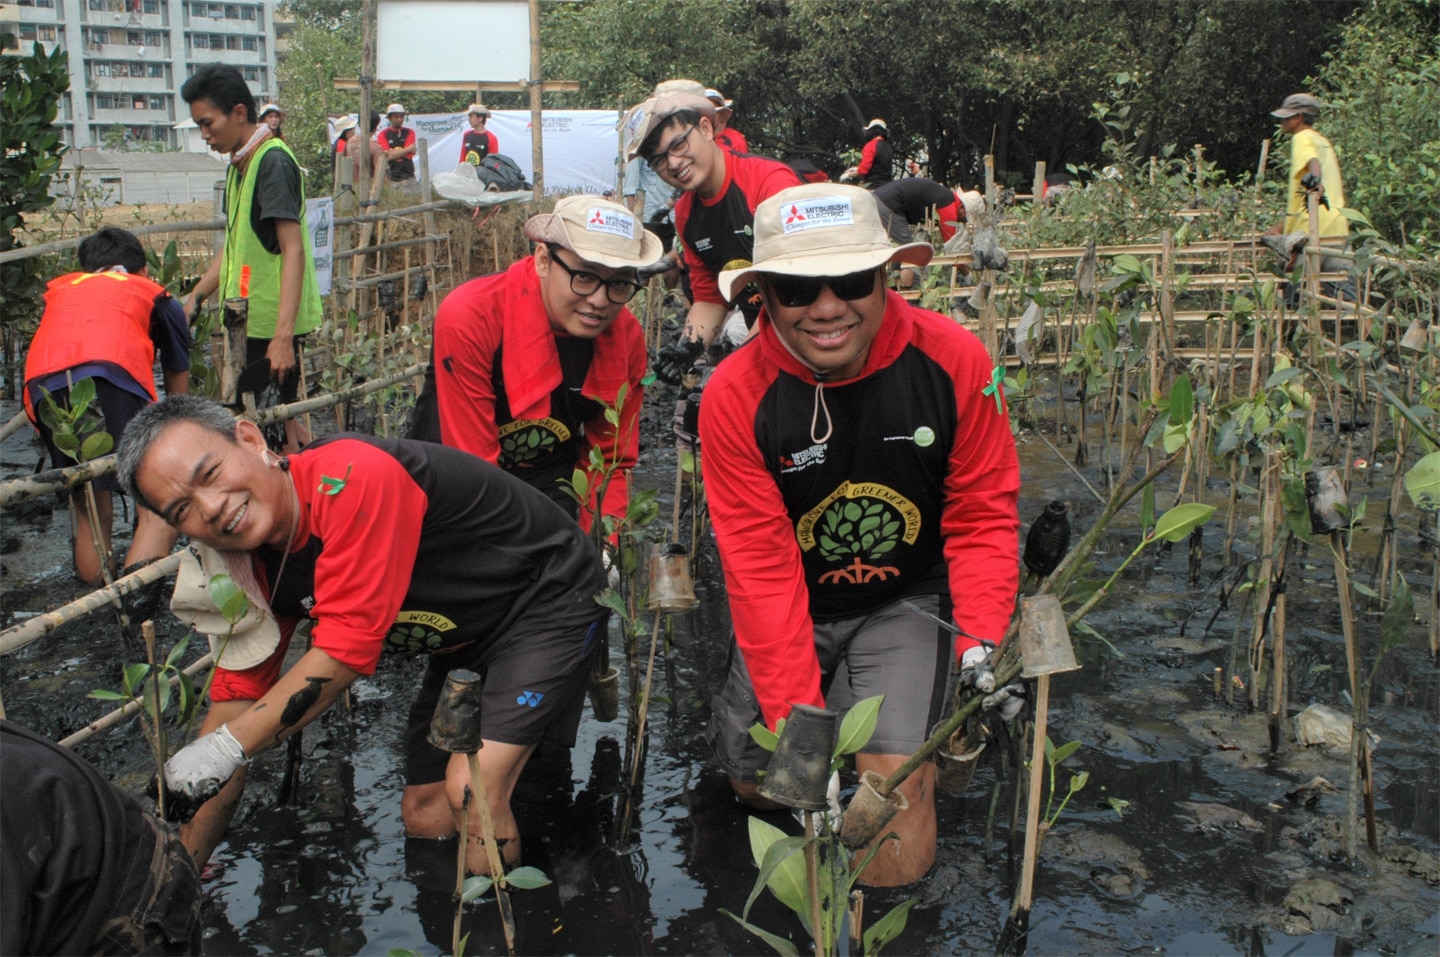 photo: Joint mangrove planting activities involving three local group companies in Indonesia 1